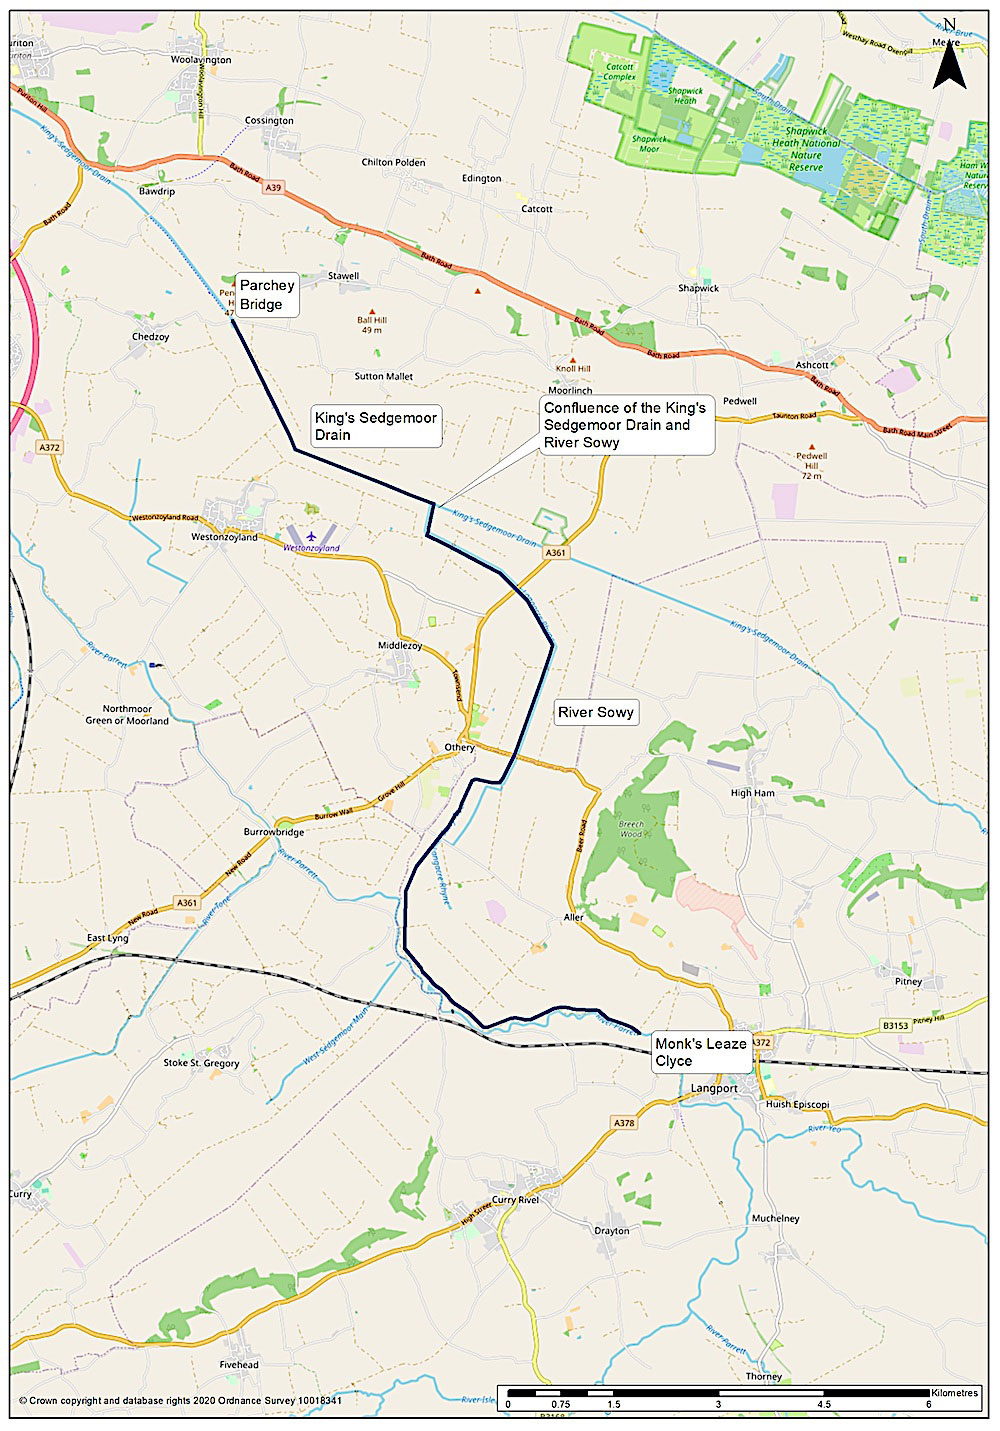 Map showing the course of the River Sowy from Aller near Langport down to its confluence with King's Sedgemoor Drain roughly between Westonzoyland and Moorlinch, and then the course of King's Sedgemoor Drain down to Parchey Bridge between Chedzoy and Stawell.